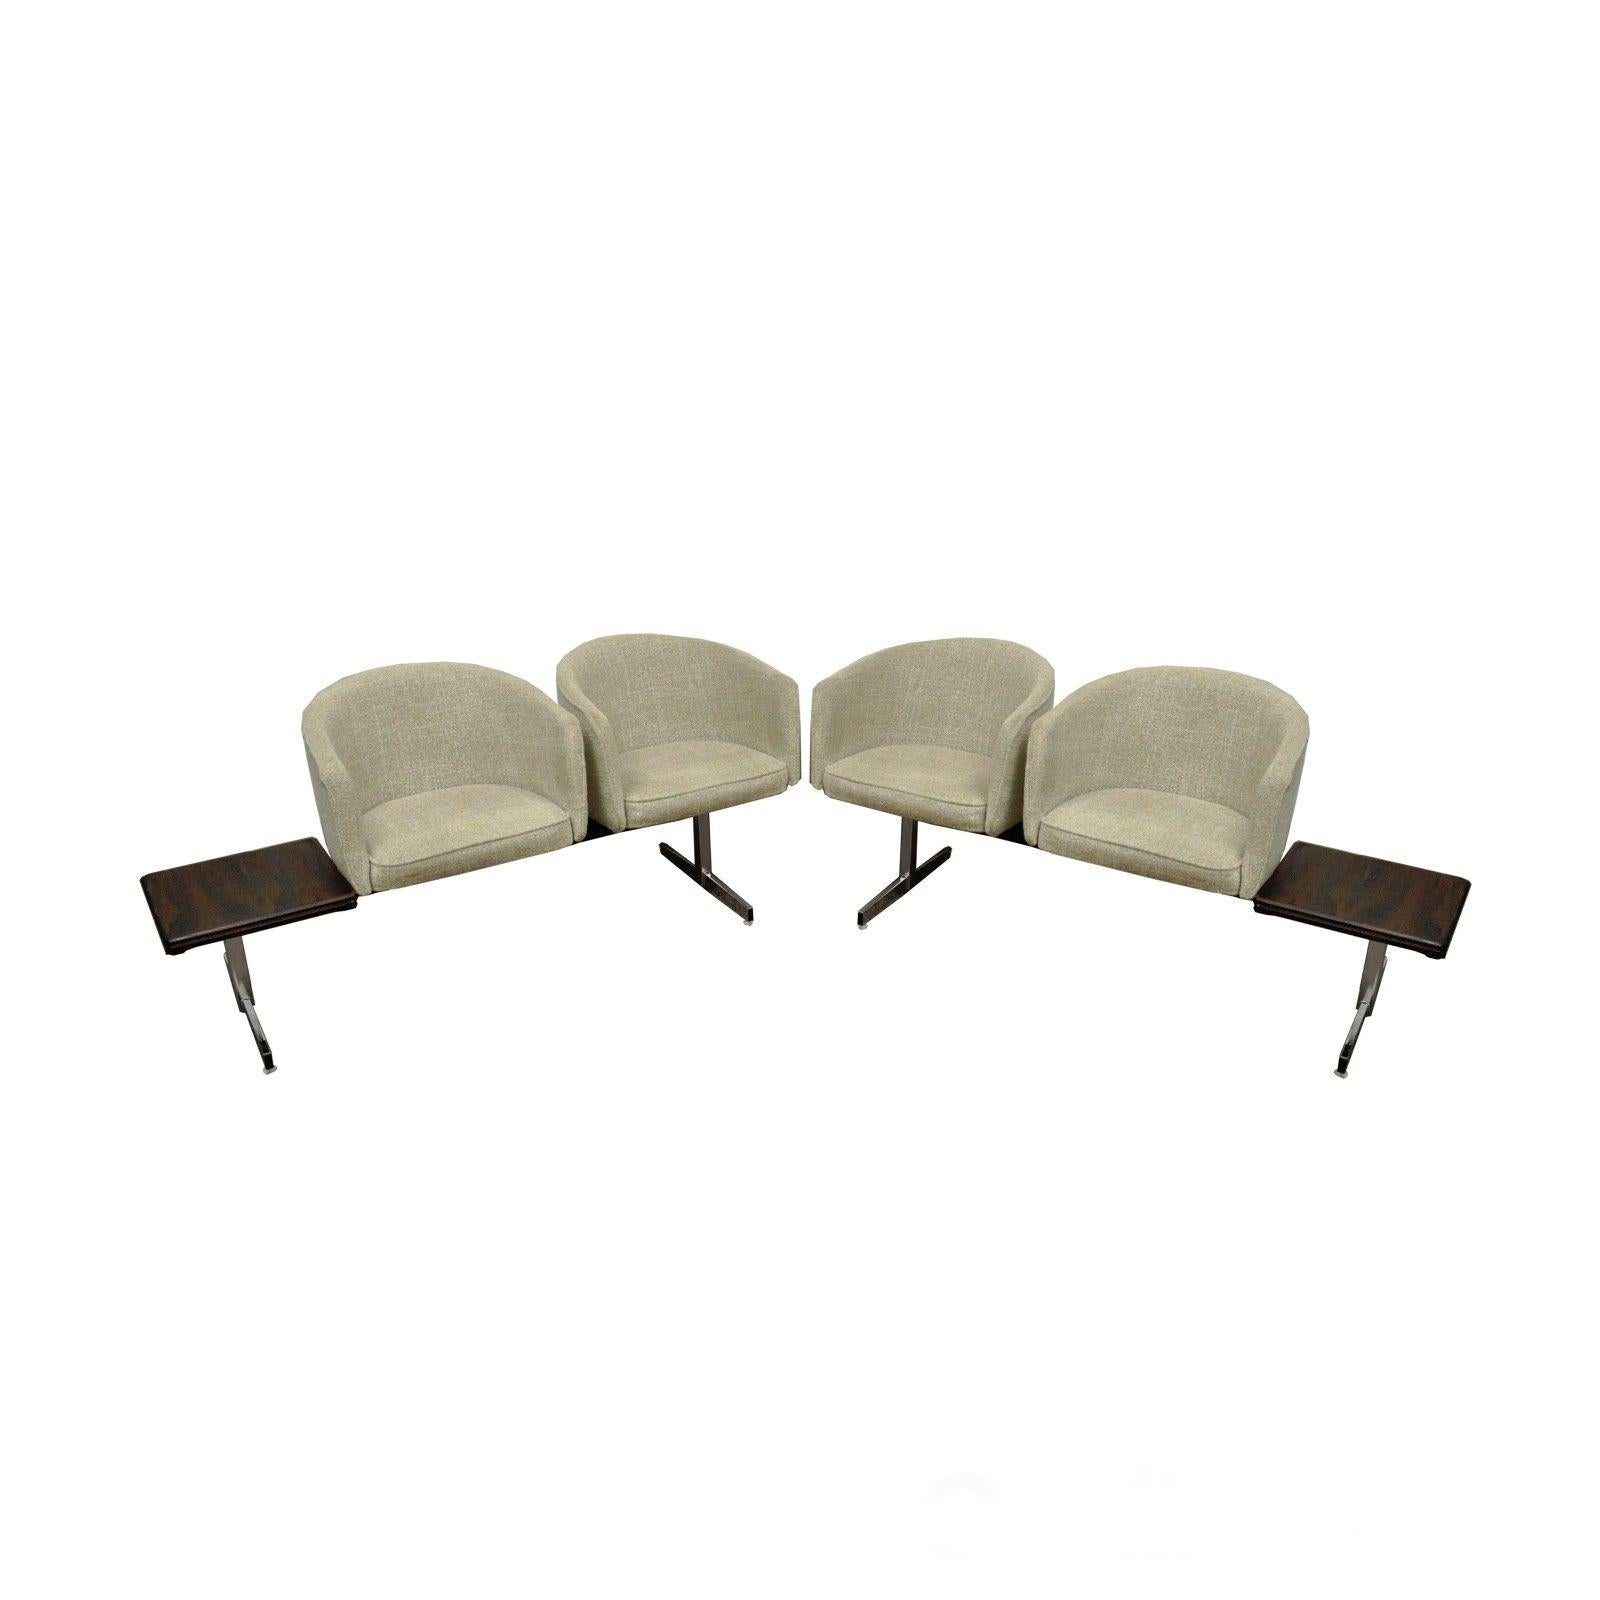 Vintage Midcentury Danish Modern Rosewood End Tables Club Chairs Sectional Sofa